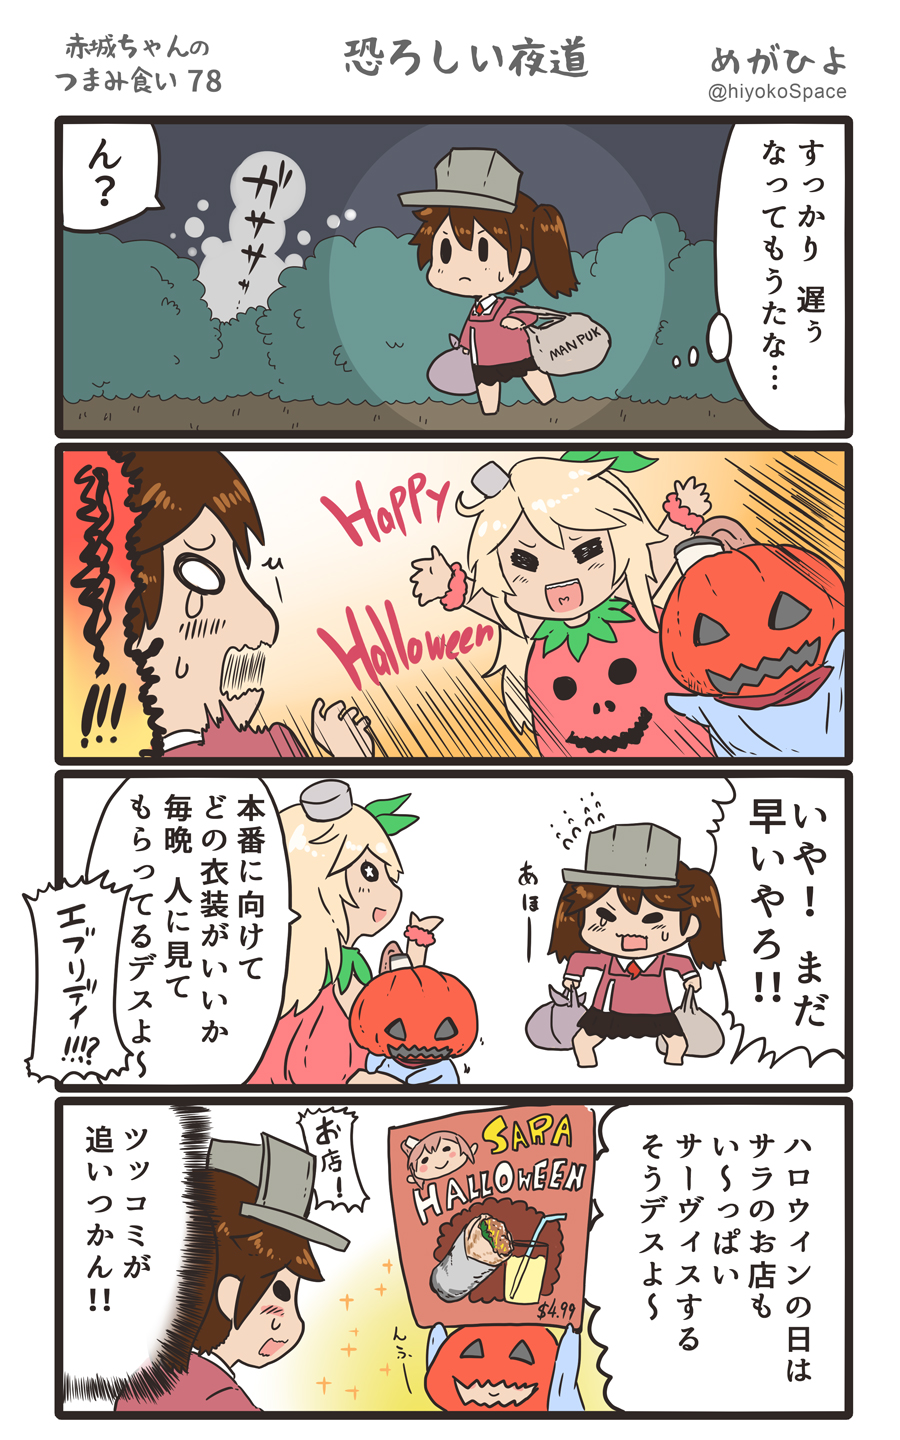 3girls 4koma alternate_costume blonde_hair brown_hair comic commentary_request halloween halloween_costume happy_halloween highres hiyoko_(nikuyakidaijinn) iowa_(kantai_collection) jack-o'-lantern kantai_collection long_hair multiple_girls pumpkin ryuujou_(kantai_collection) saratoga_(kantai_collection) side_ponytail speech_bubble thought_bubble translation_request trick_or_treat twintails twitter_username visor_cap younger